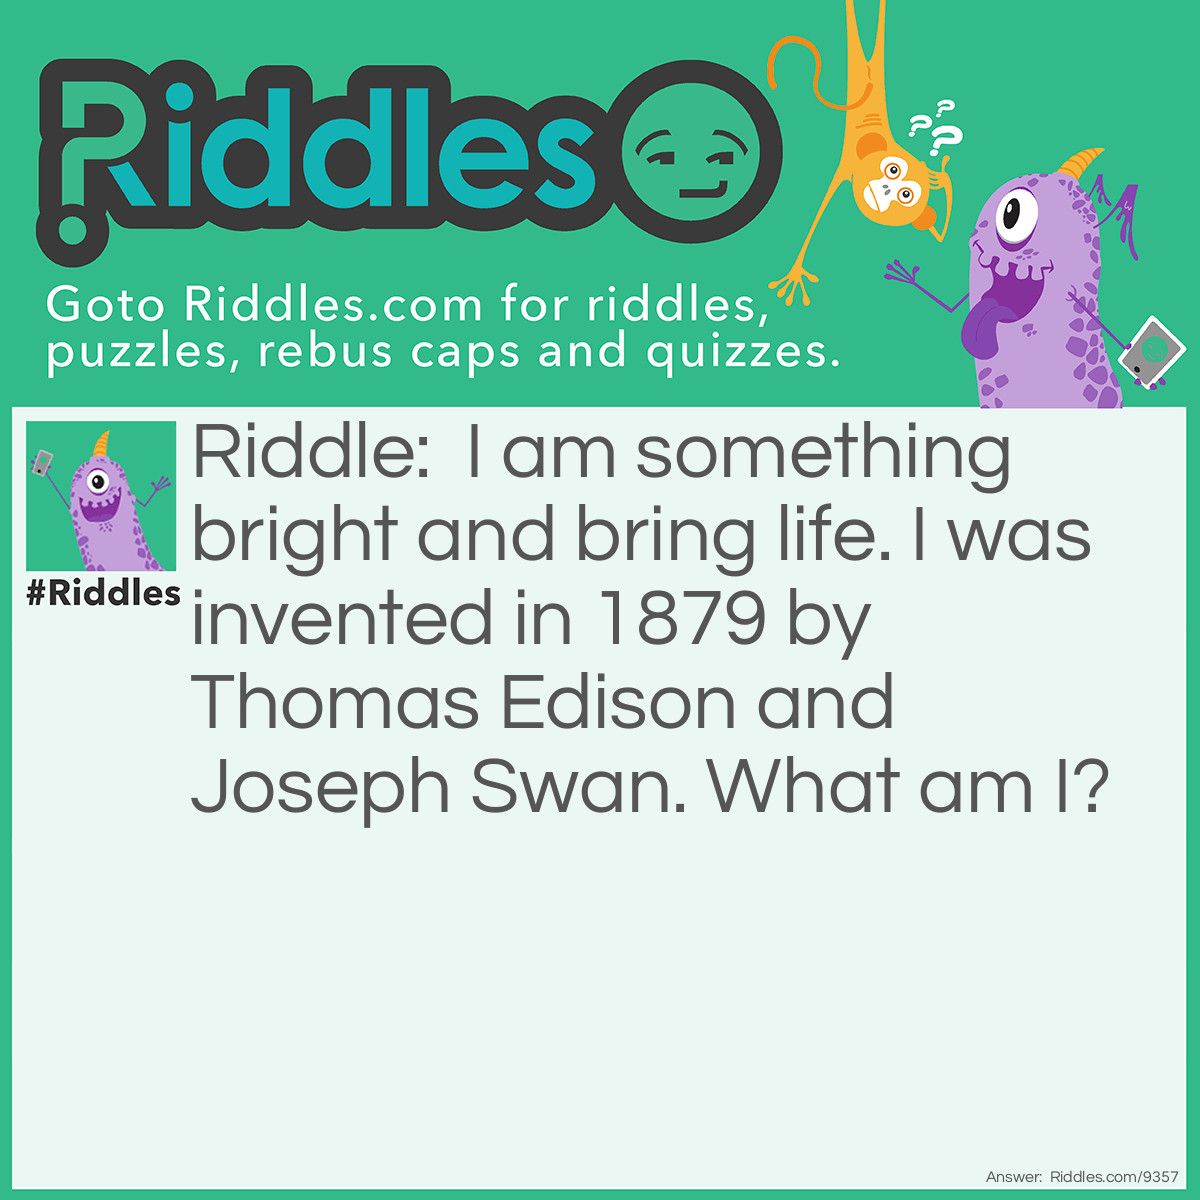 Riddle: I am something bright and bring life. I was invented in 1879 by Thomas Edison and Joseph Swan. What am I? Answer: Thomas Edison and Joseph Swan invented the light bulb in 1879.